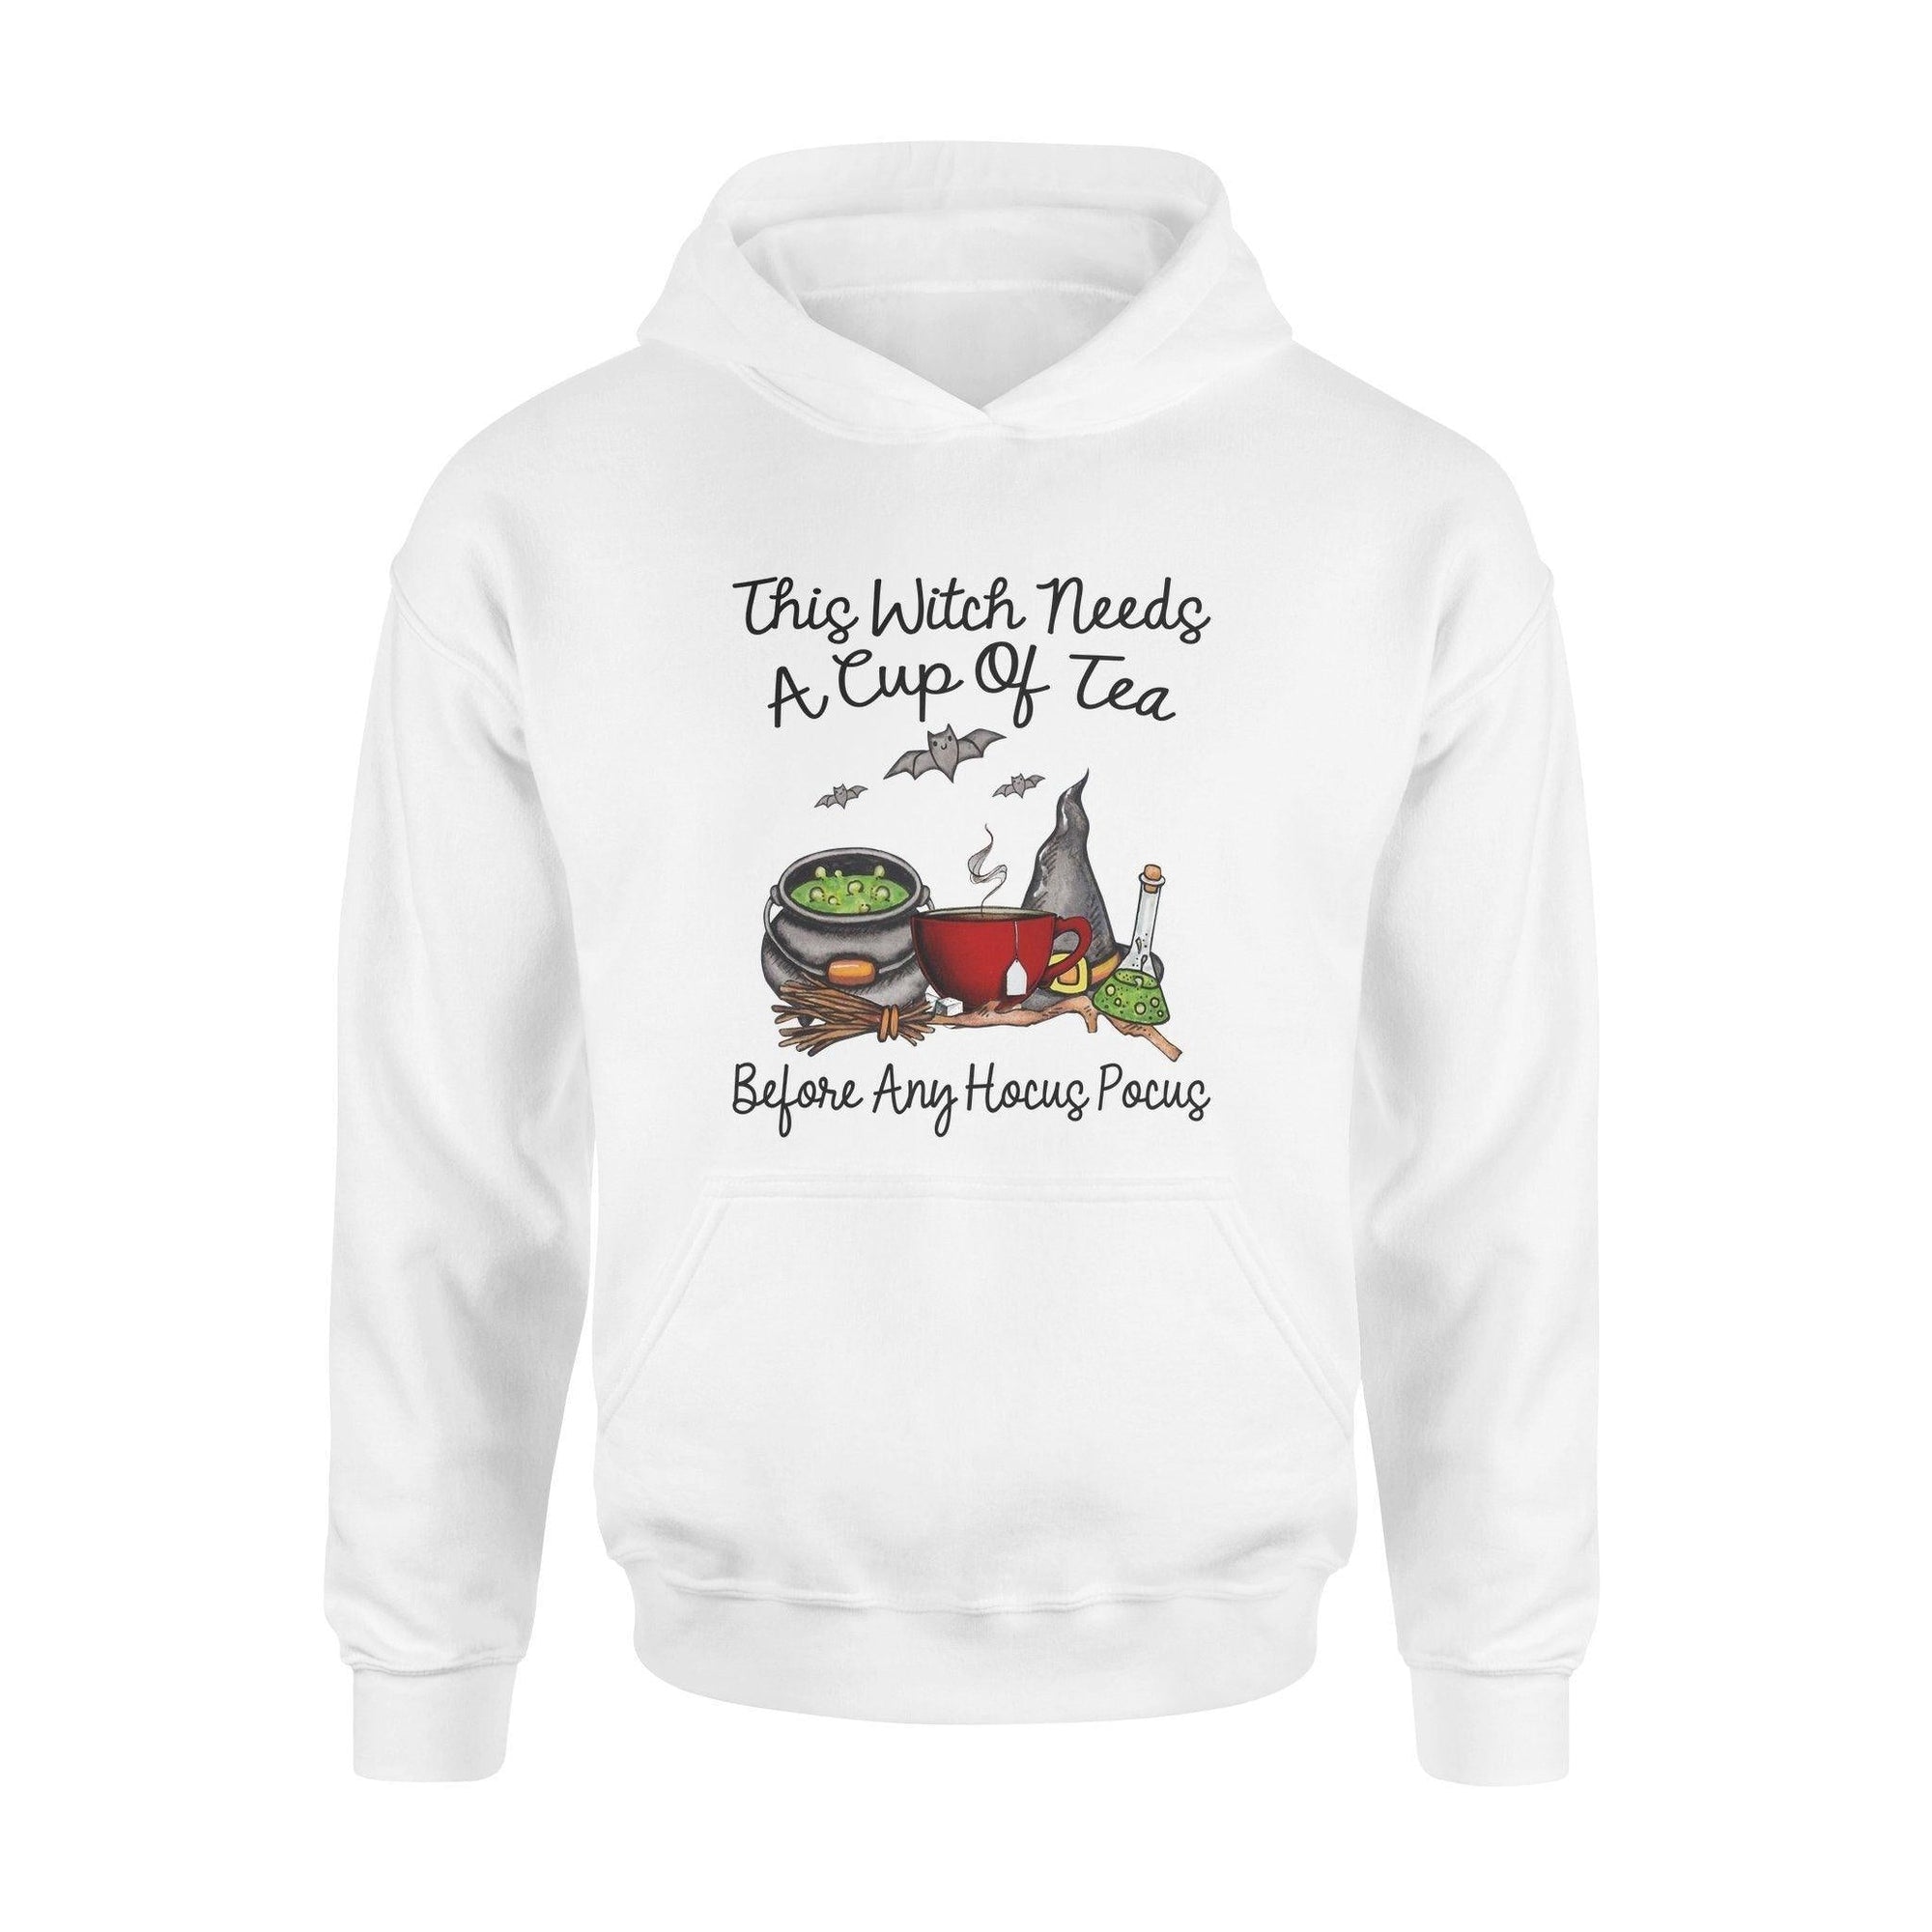 Witch, Tea This Witch Needs A Cup Of Tea - Standard Hoodie - PERSONAL84